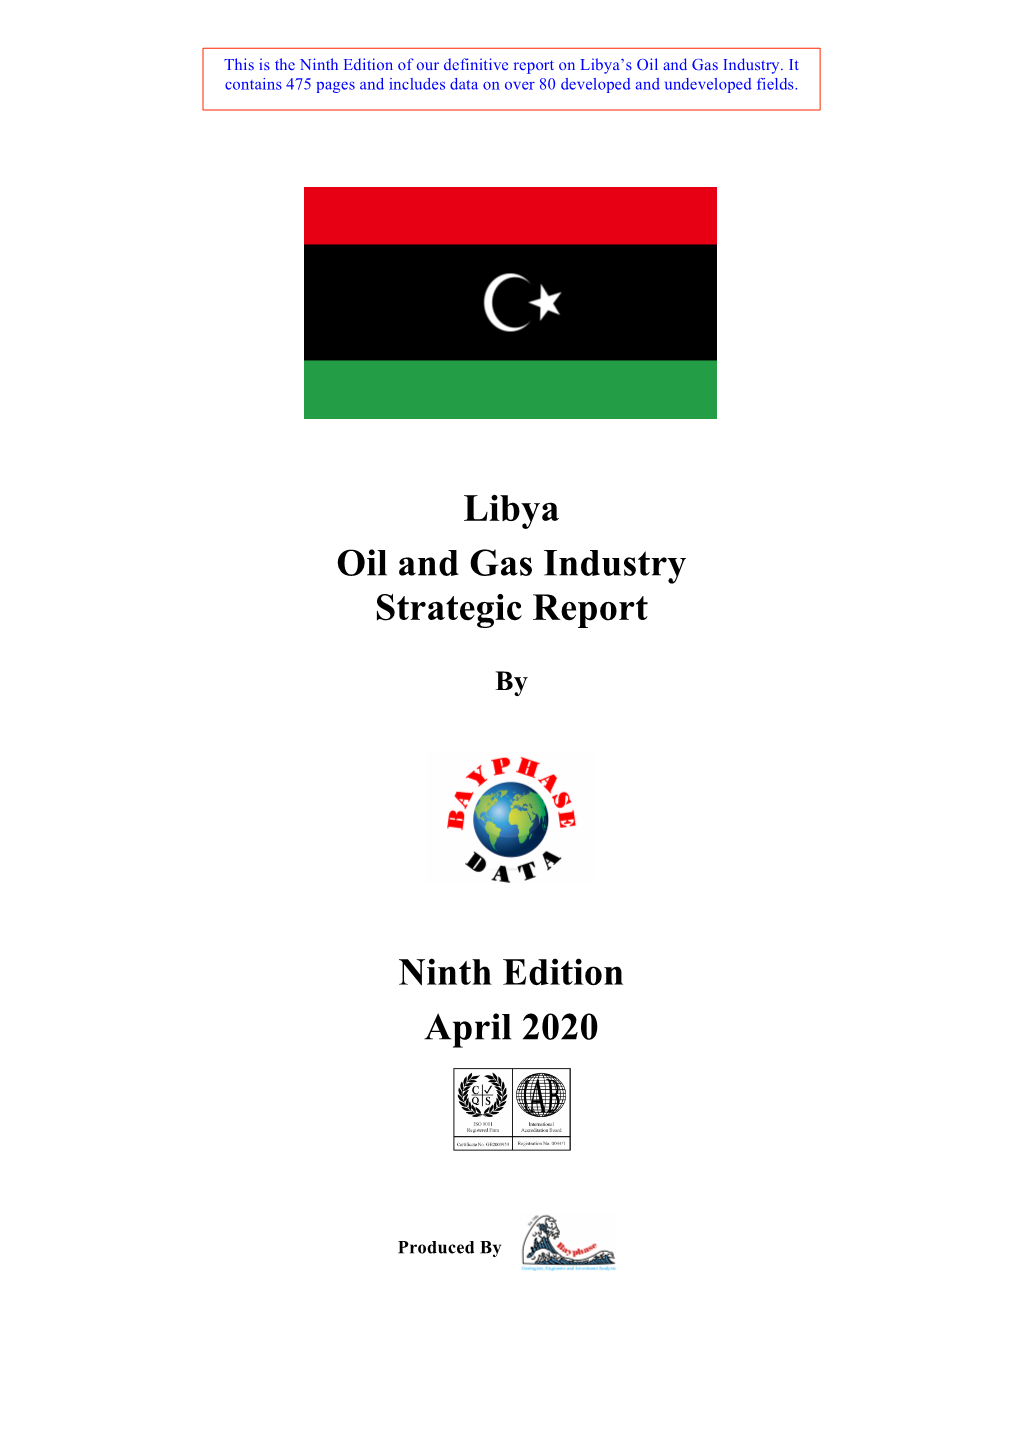 Libya Oil and Gas Industry Strategic Report Ninth Edition April 2020